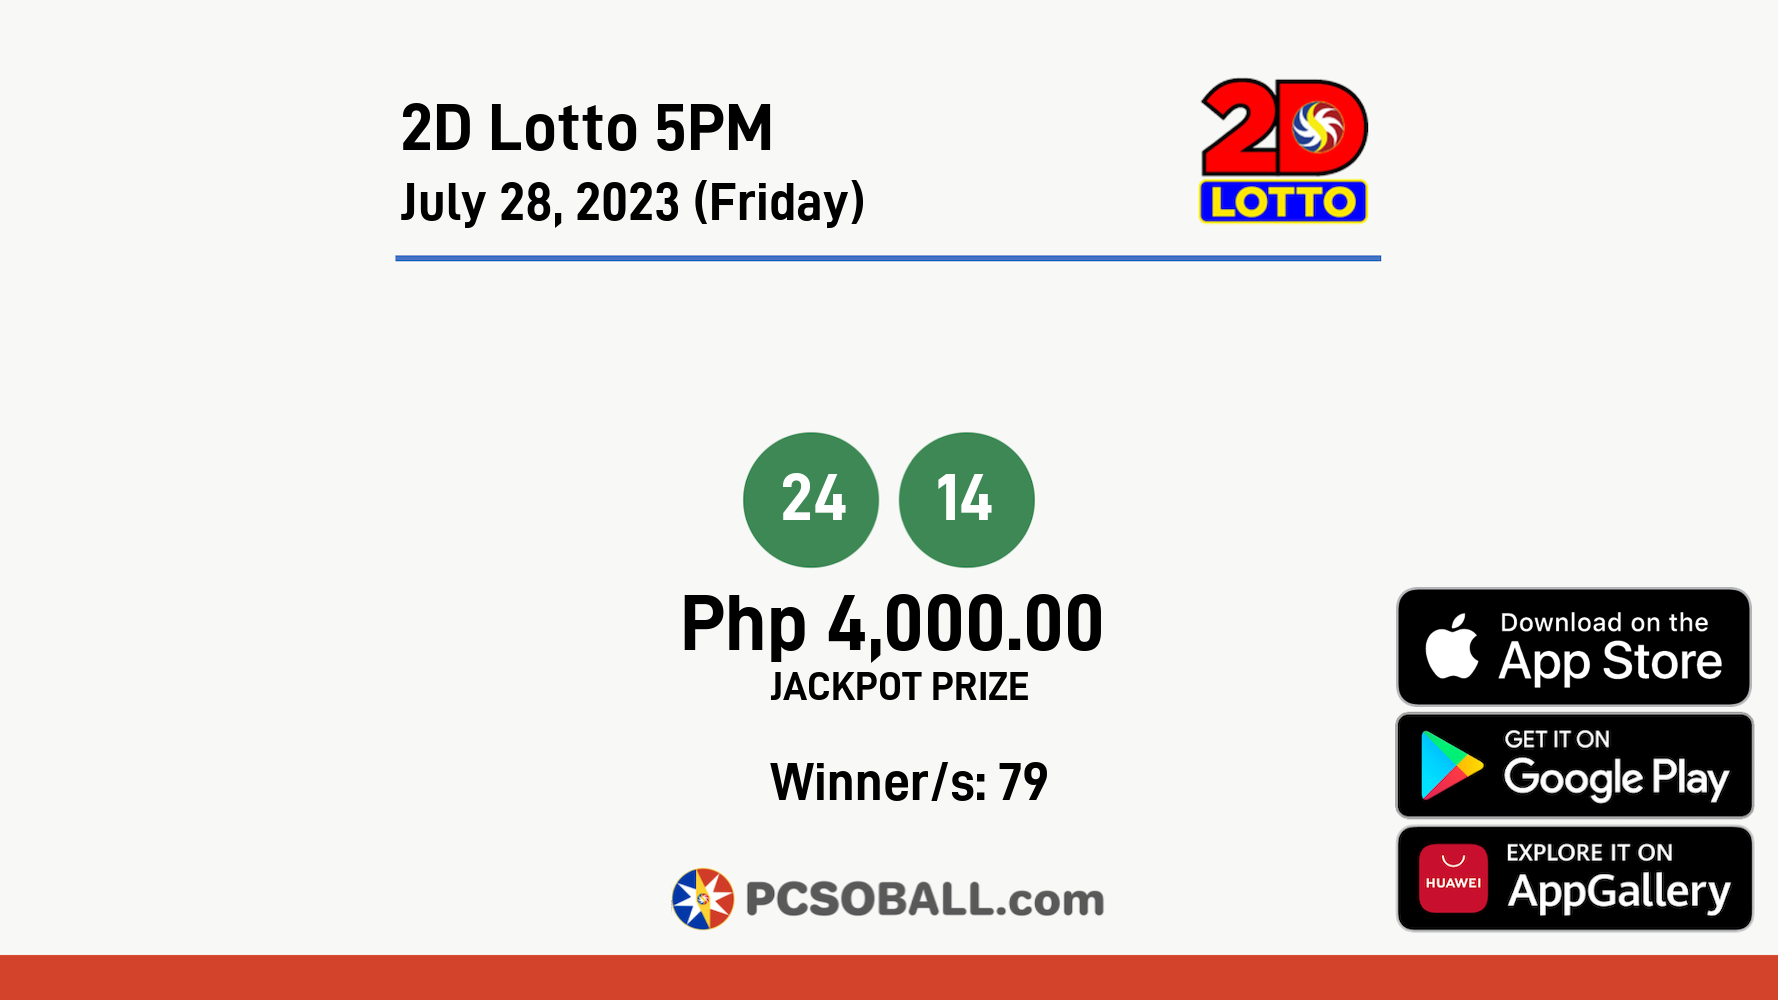 2D Lotto 5PM July 28, 2023 (Friday) Result